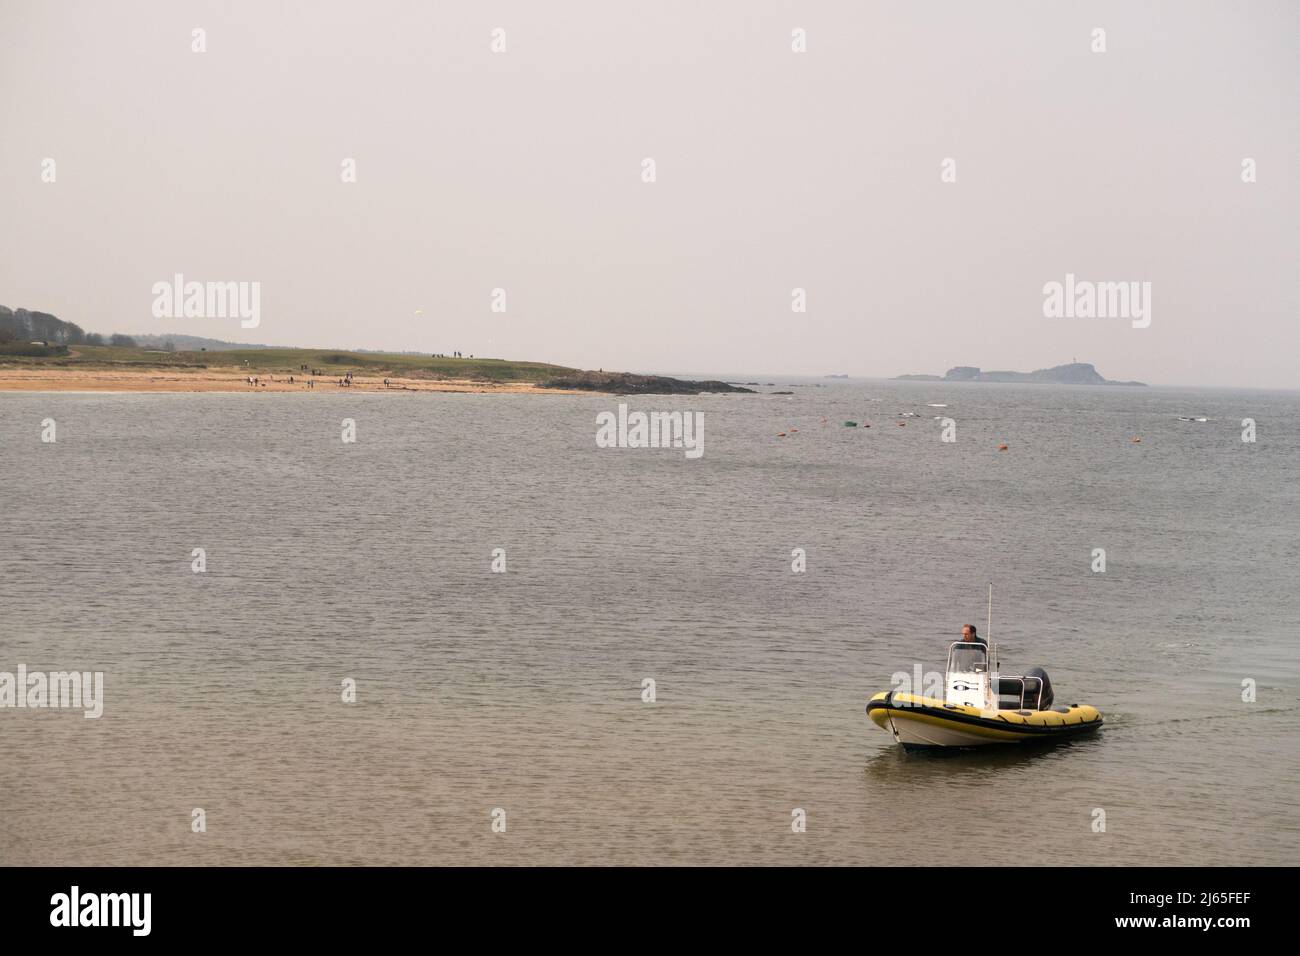 A man driving a motorboat along the coast in North Berwick, Scotland, UK. Stock Photo